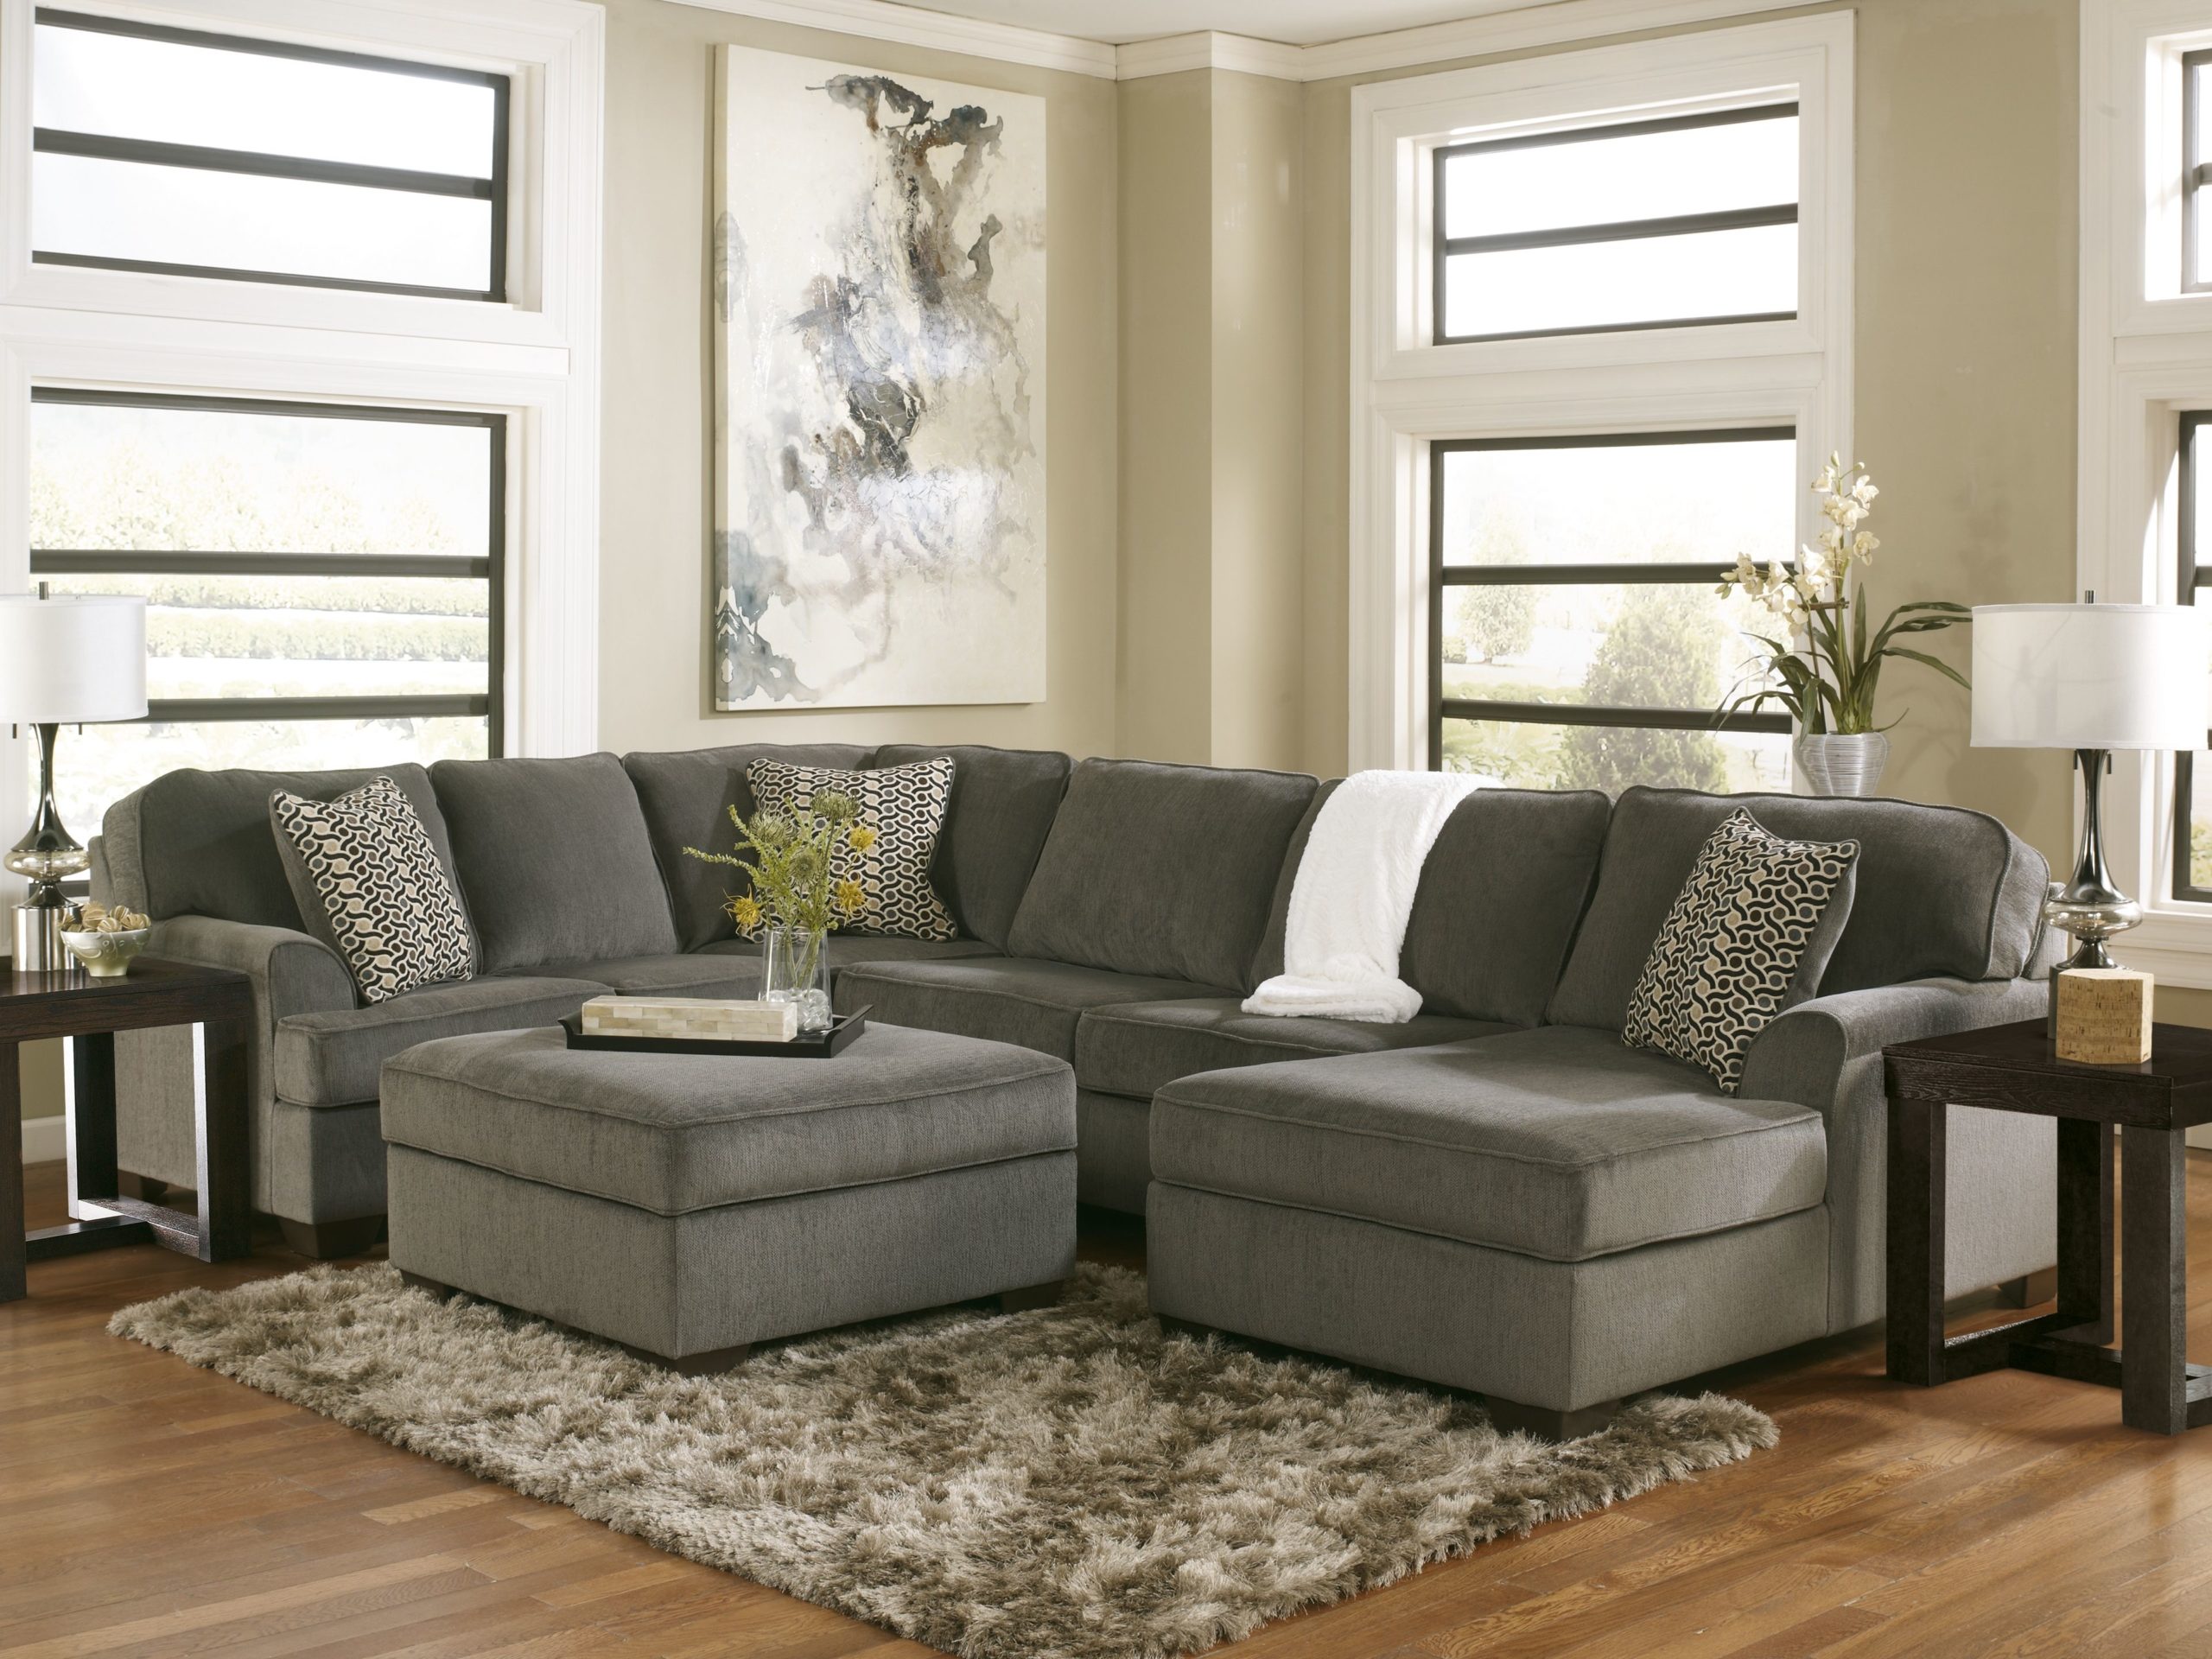 Living Room Ideas With Couch And 2 Chairs